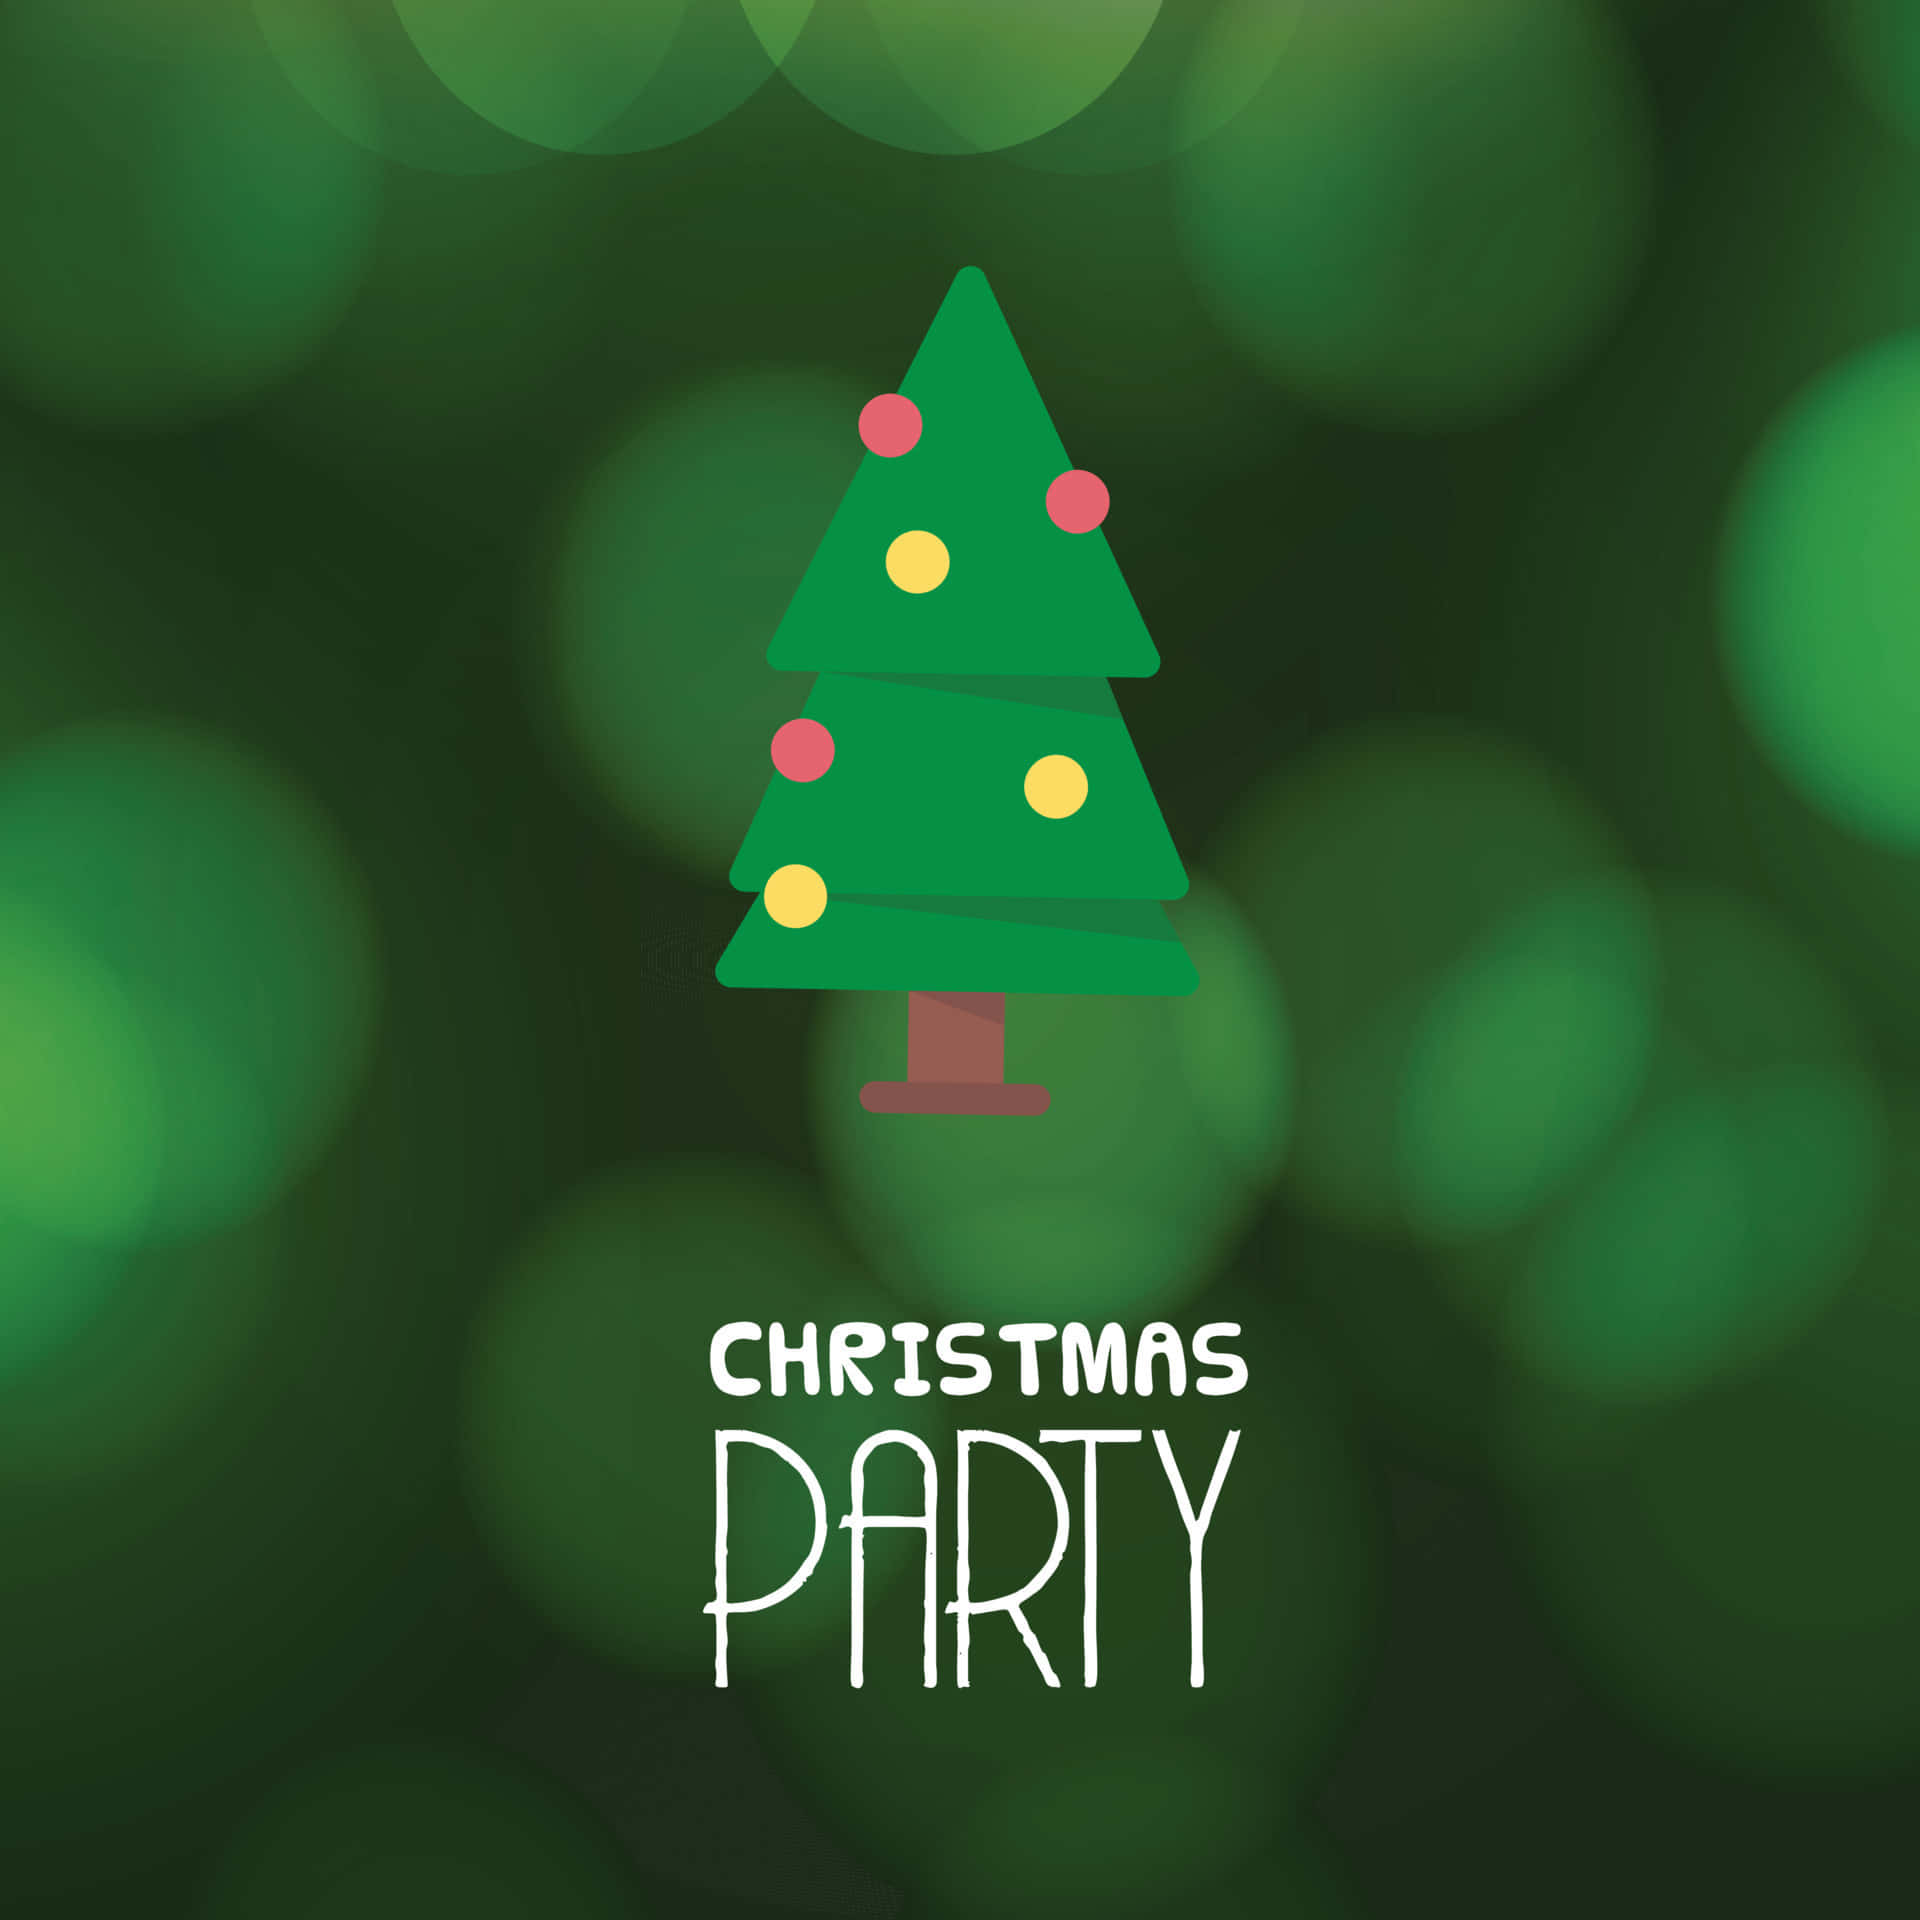 holiday party invitation background